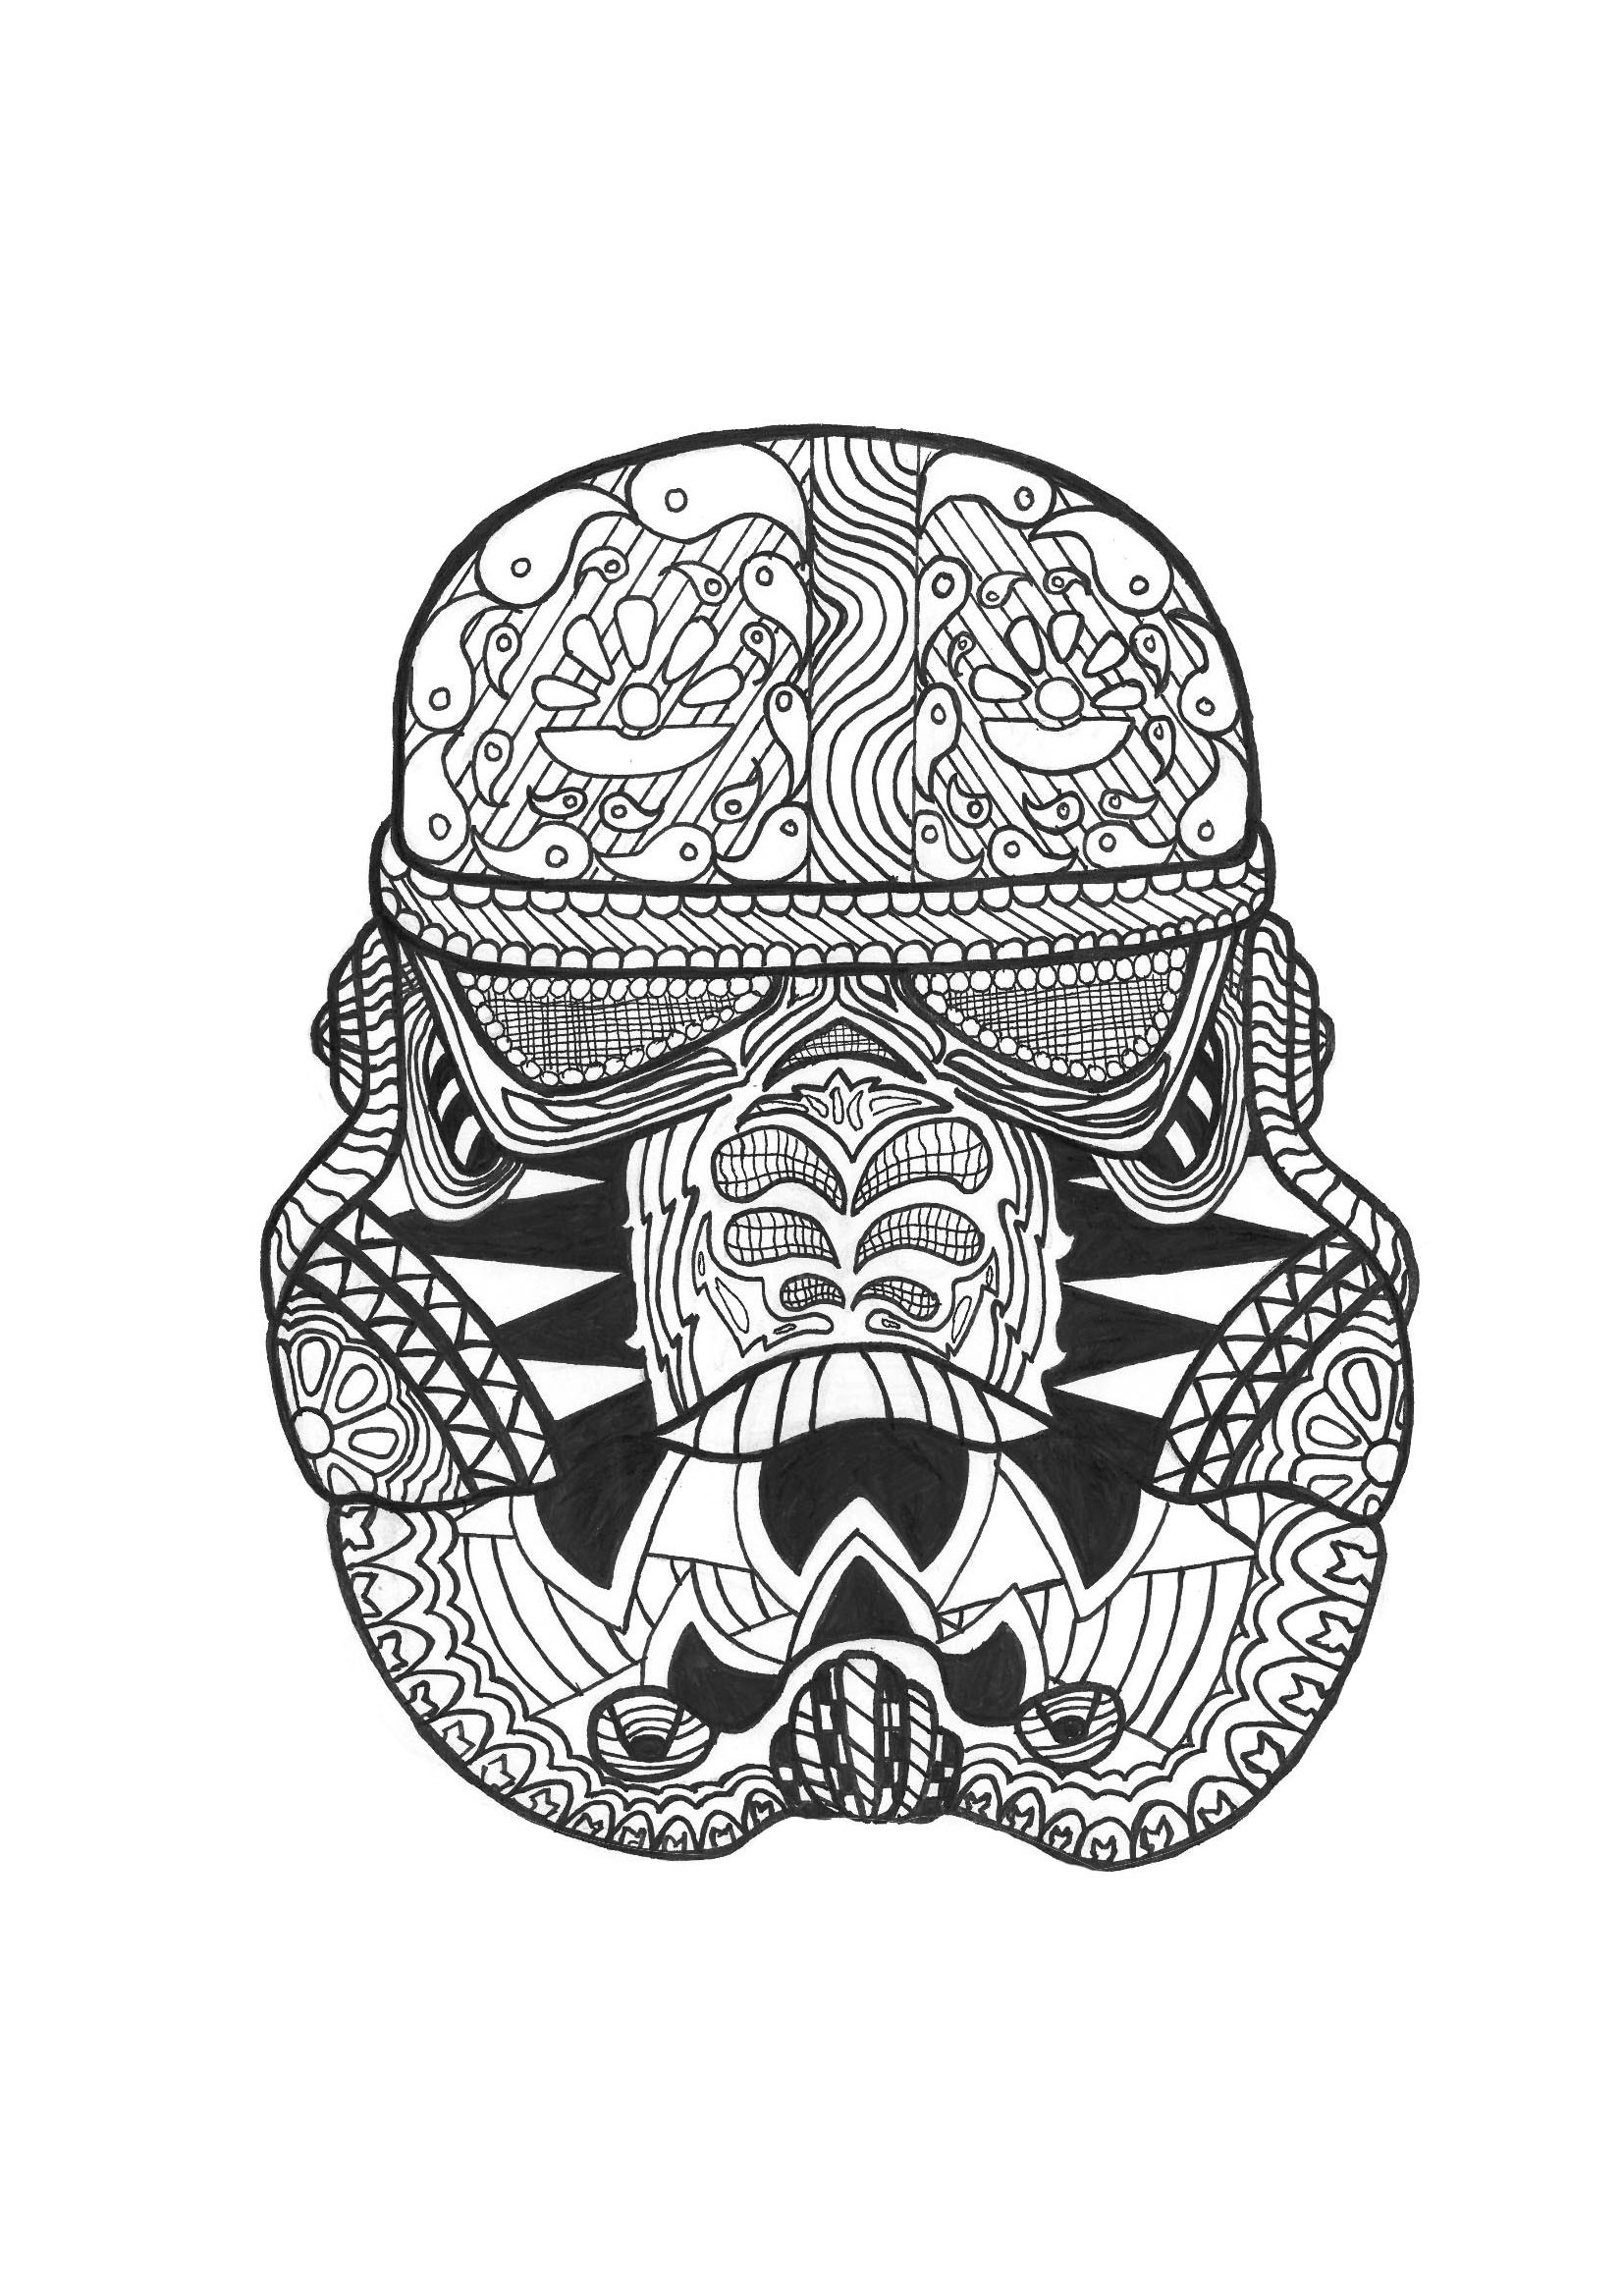 Star Wars Adult Coloring Book
 Star wars to Star Wars Kids Coloring Pages